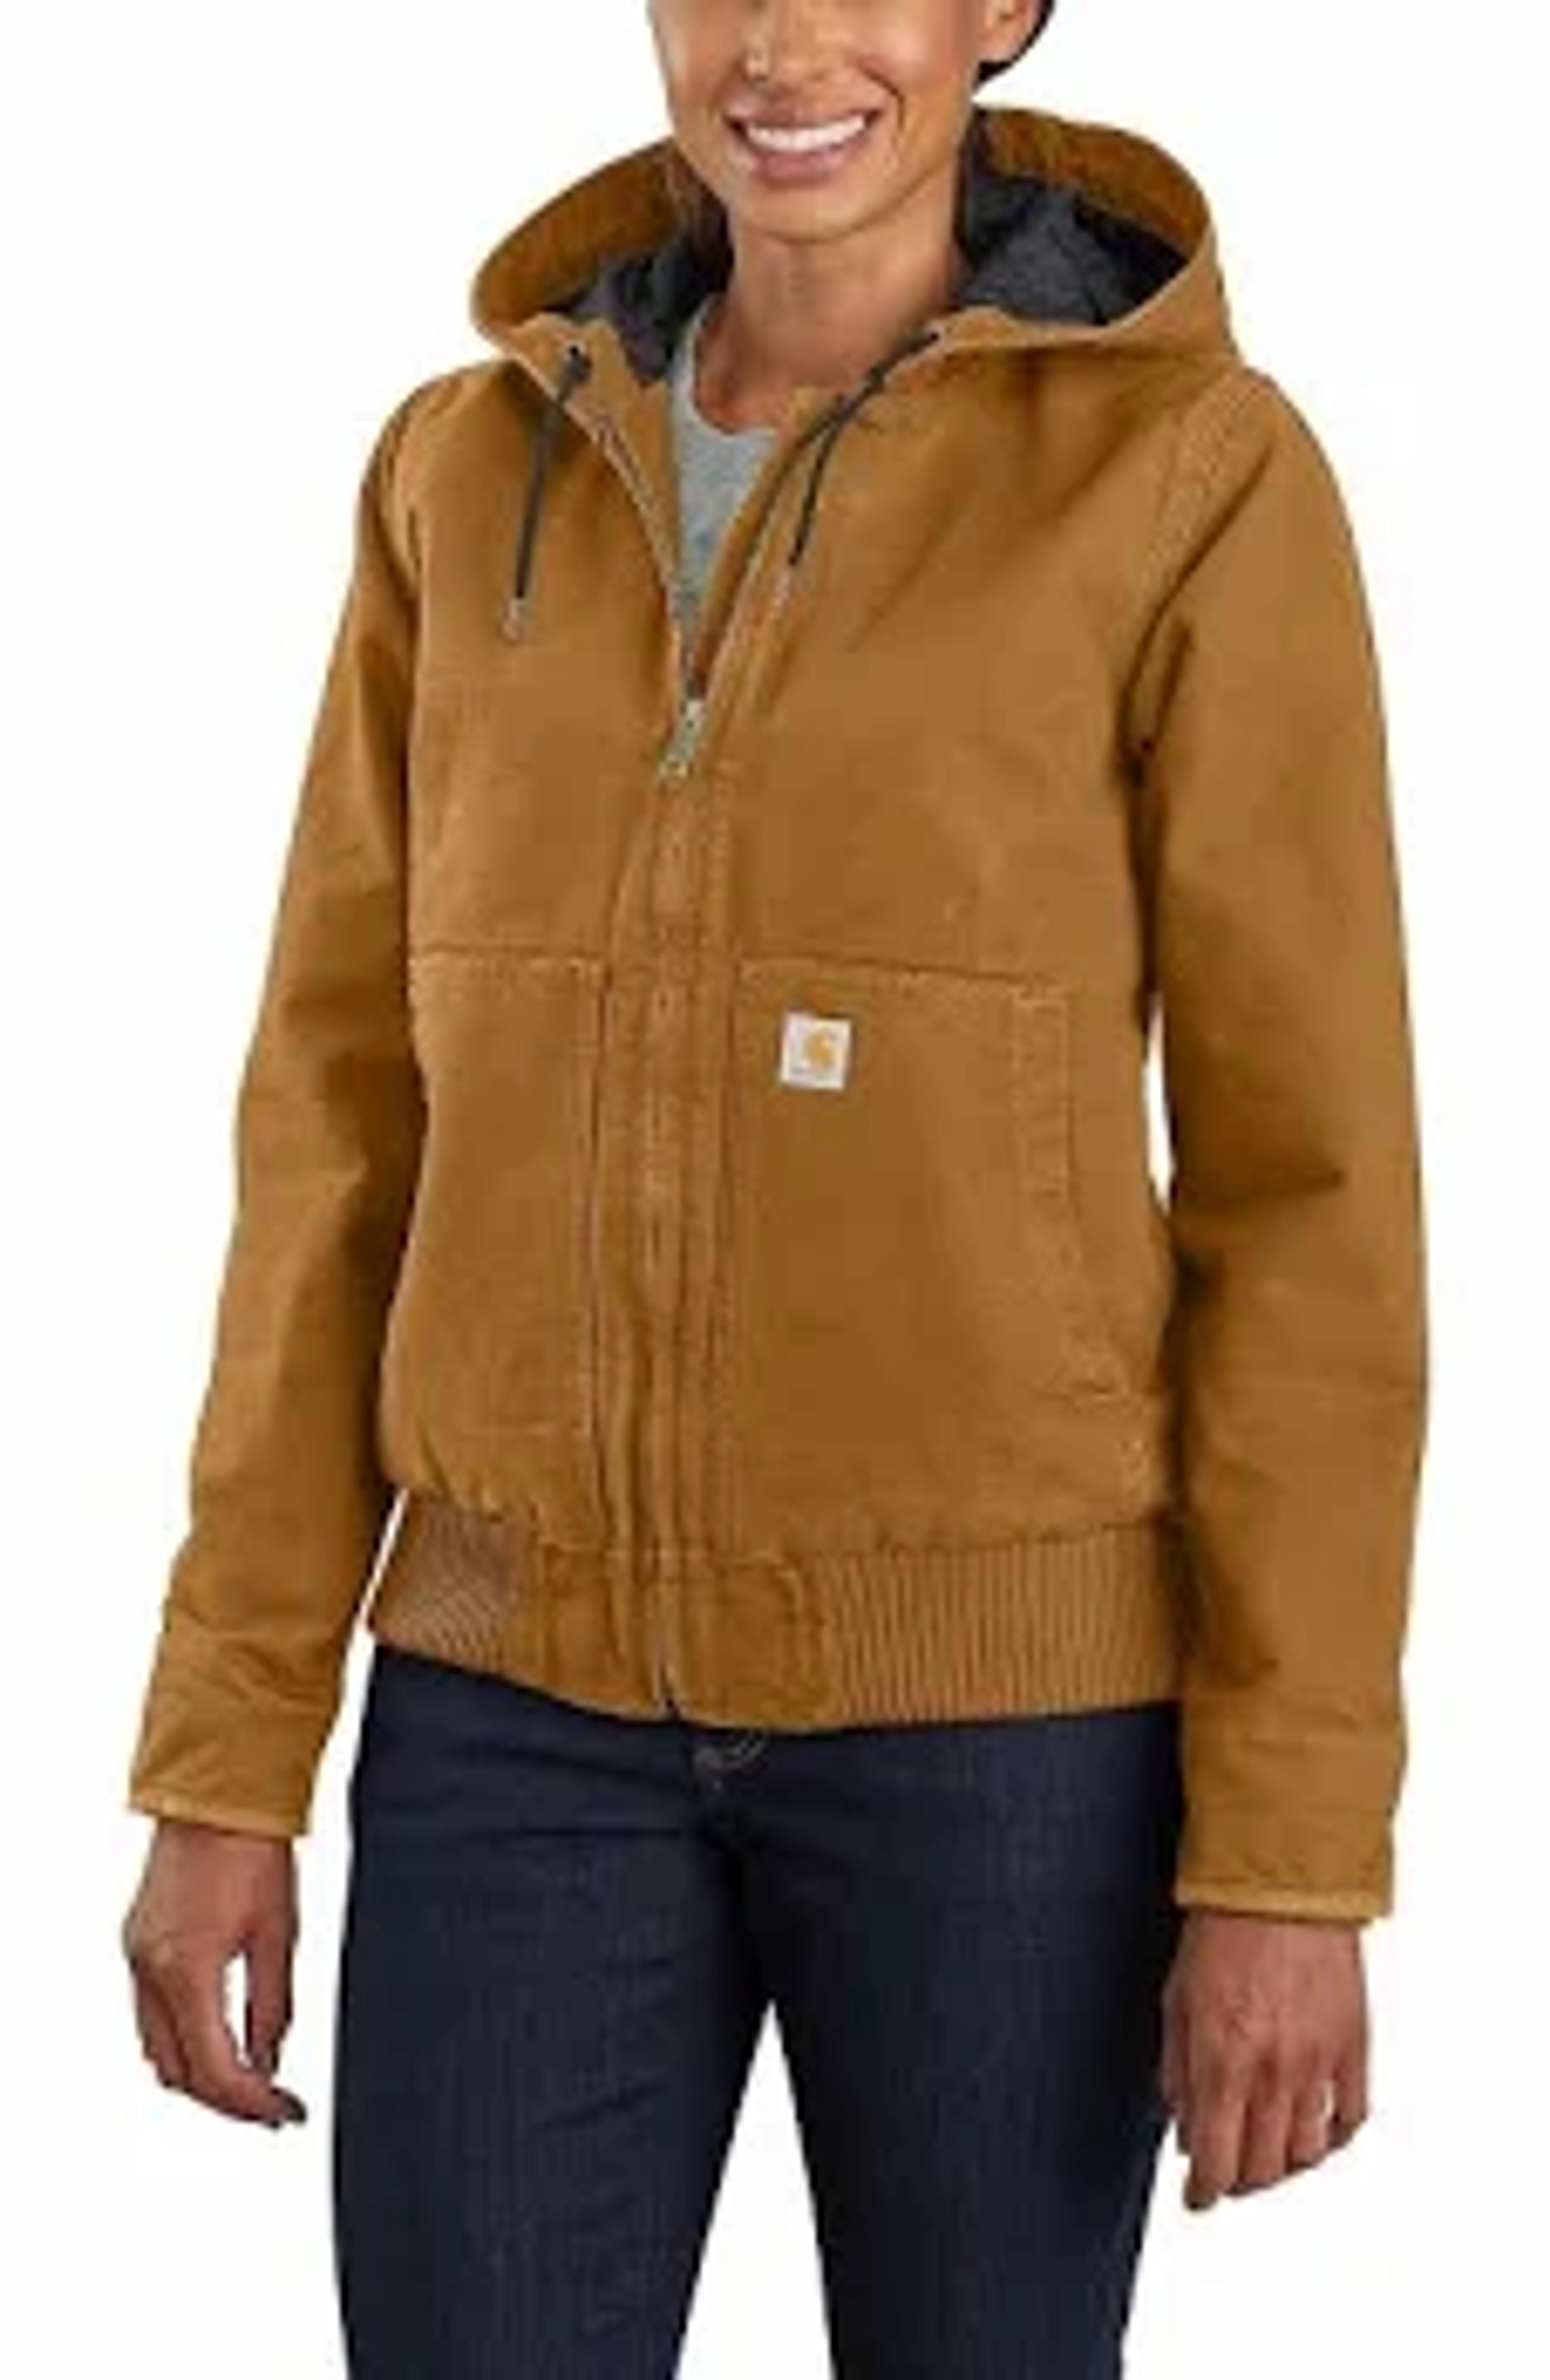 Women's Loose Fit Washed Duck Insulated Active Jac - 3 Warmest Rating | Women's Cold Weather Gear | Carhartt